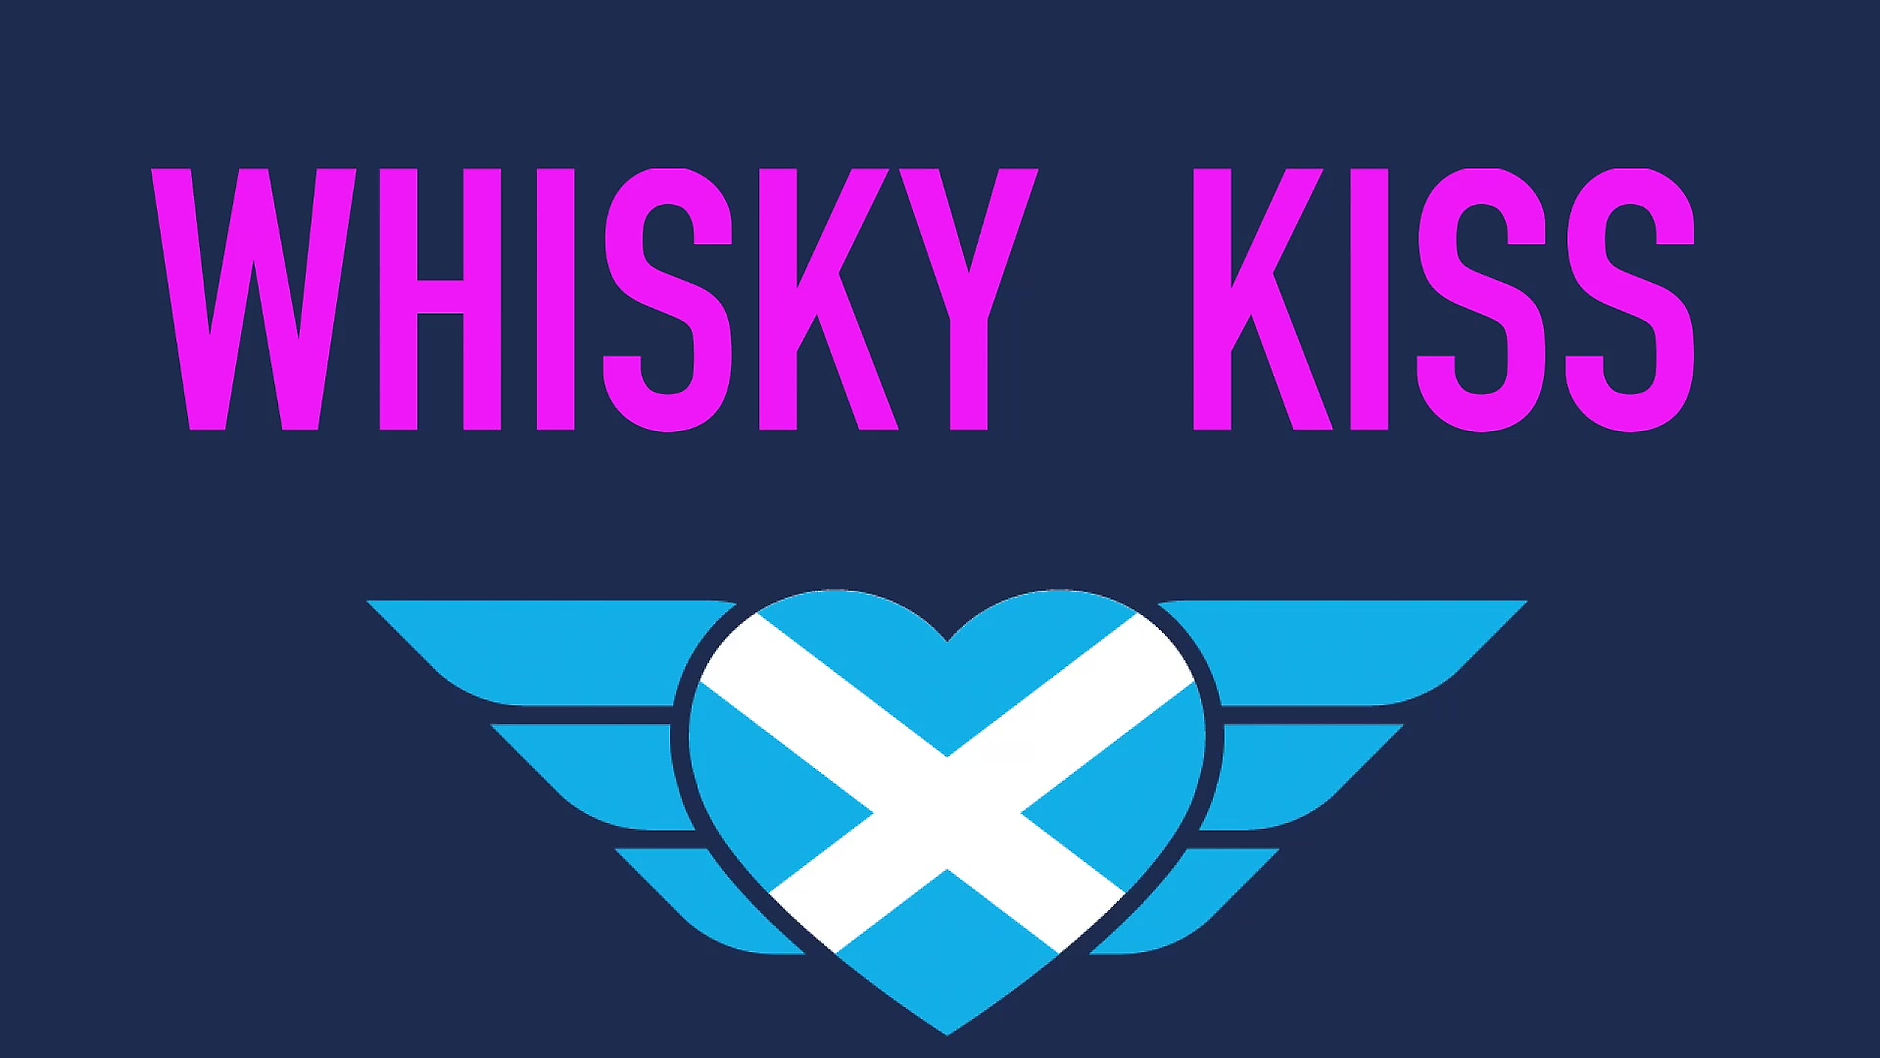 Introducing...WHISKY KISS